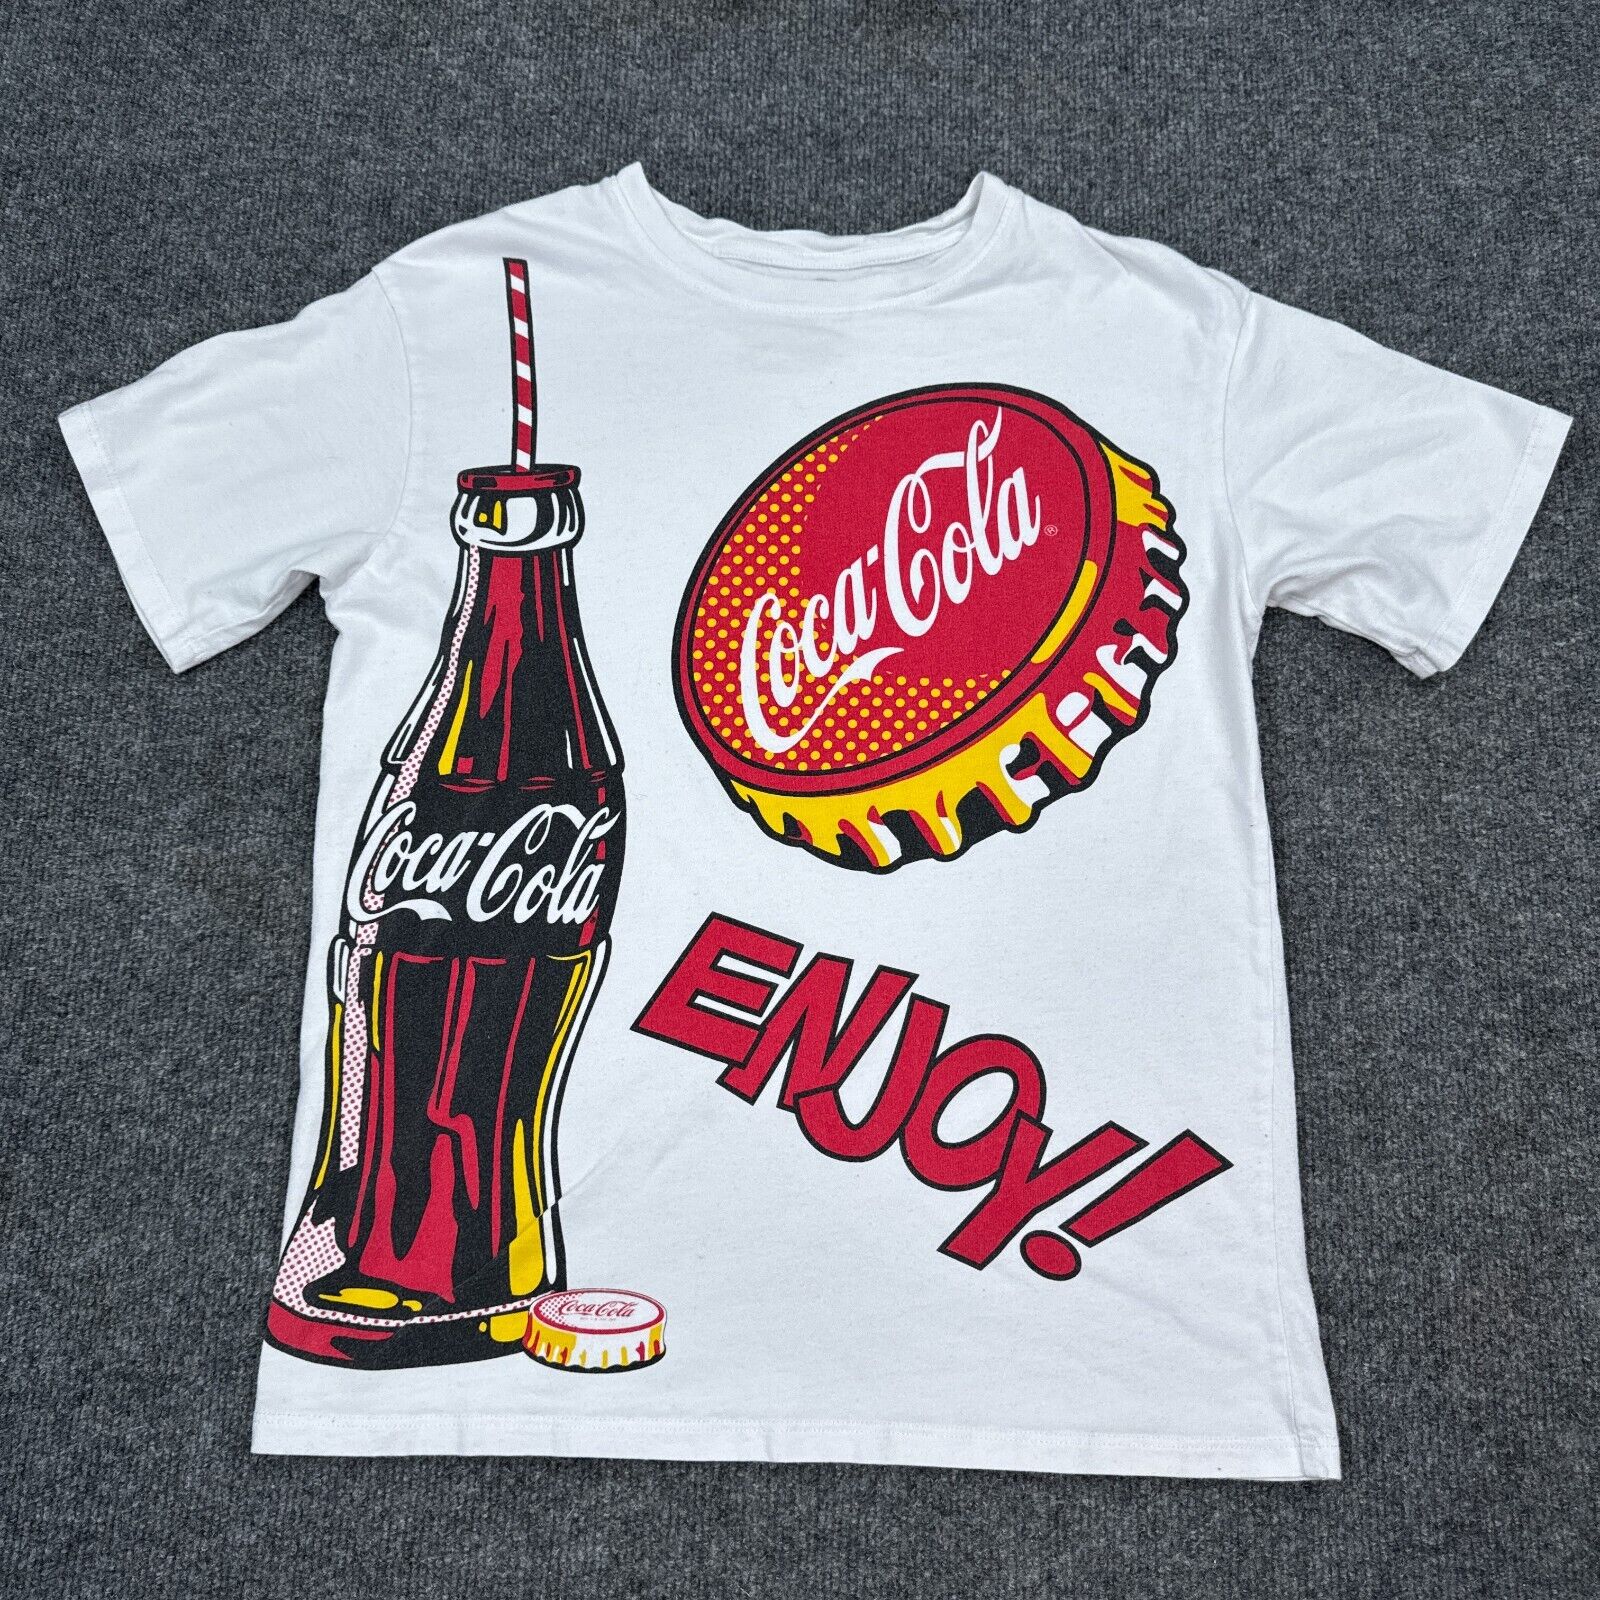 Coca Cola Popart T Shirt Top Womens Size Small White Vintage Style Big Logo Tee